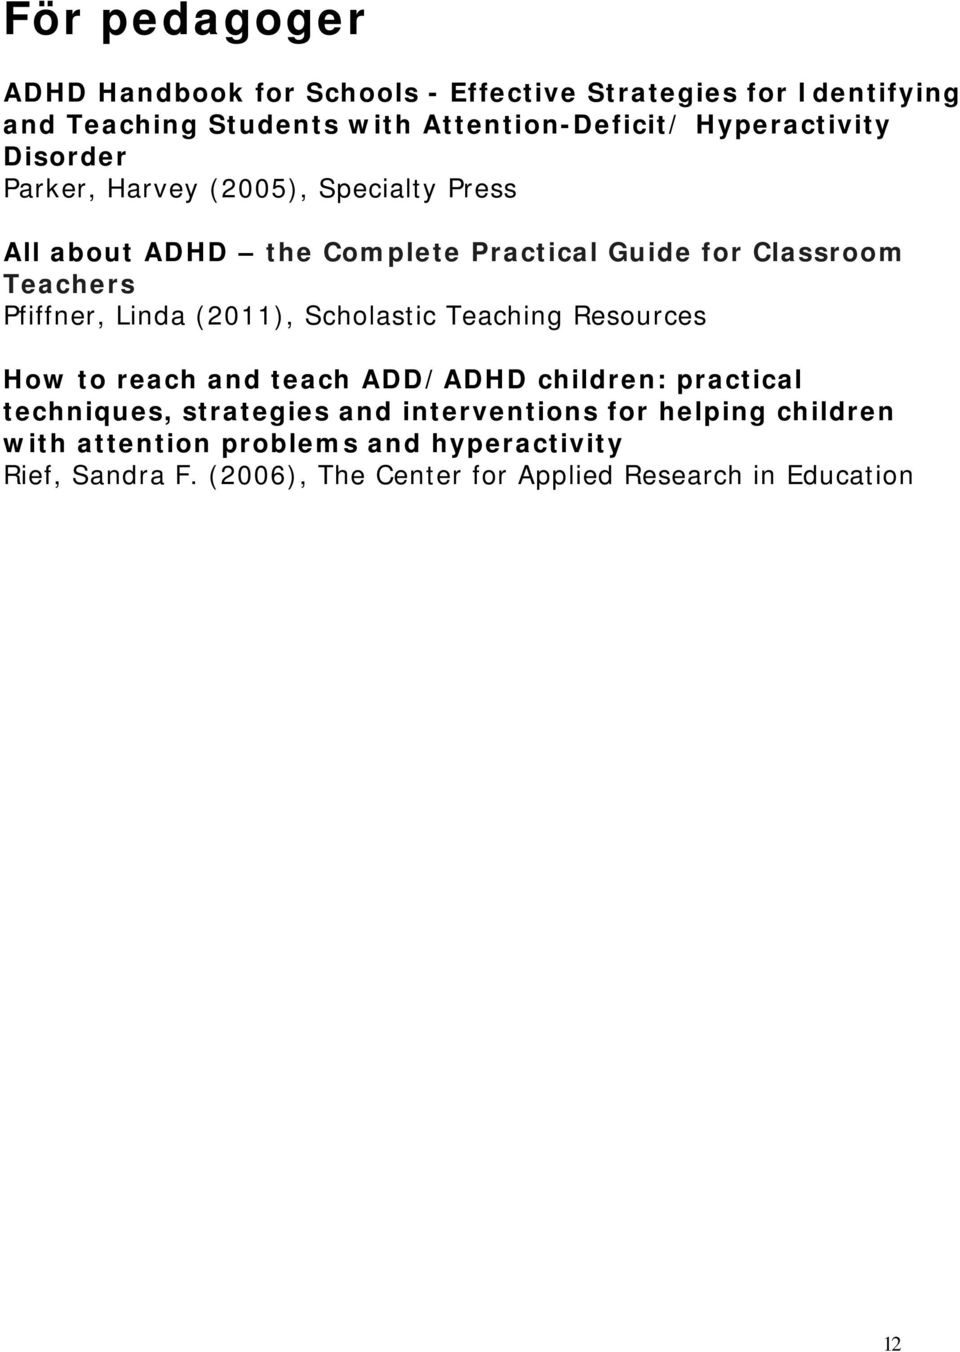 Pfiffner, Linda (2011), Scholastic Teaching Resources How to reach and teach ADD/ADHD children: practical techniques, strategies and